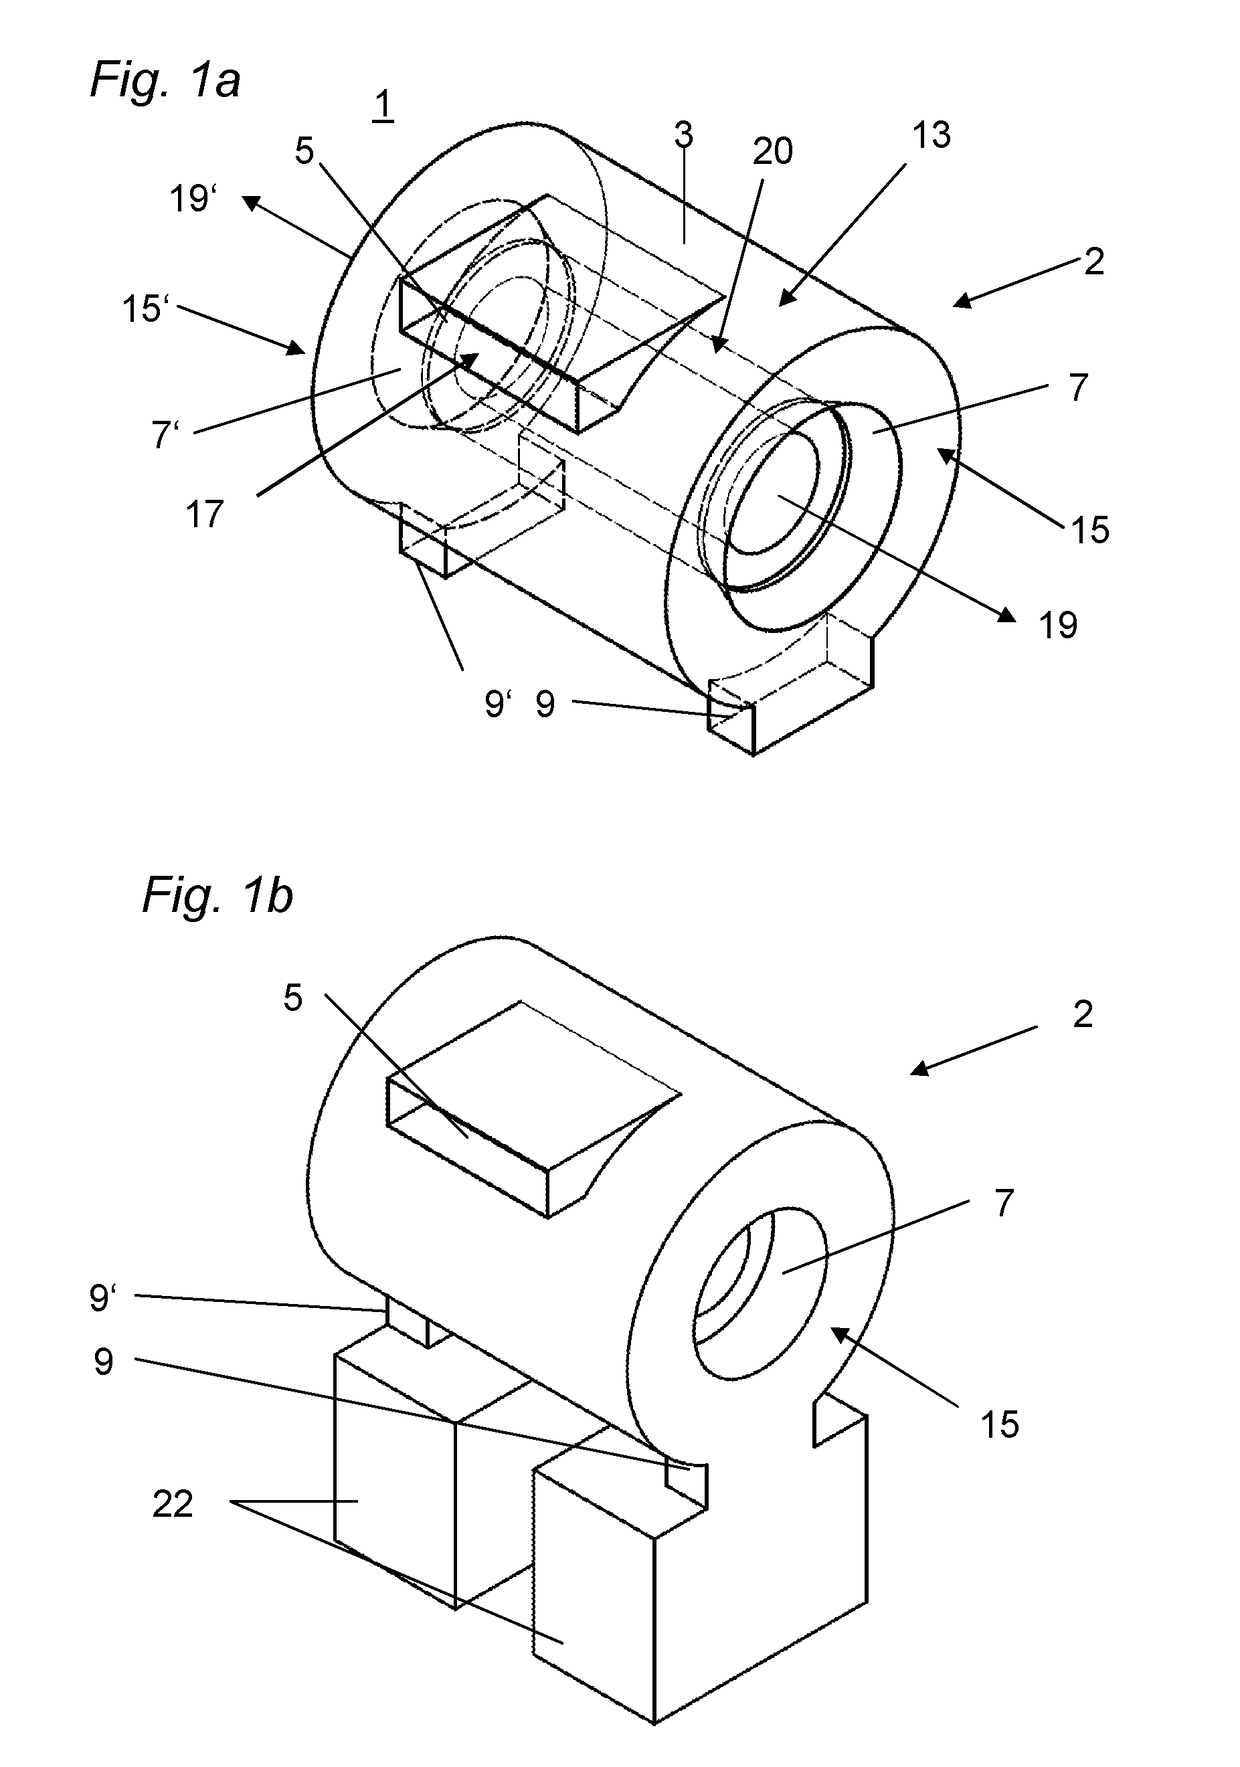 Separation device for separating particles from a fluid flow